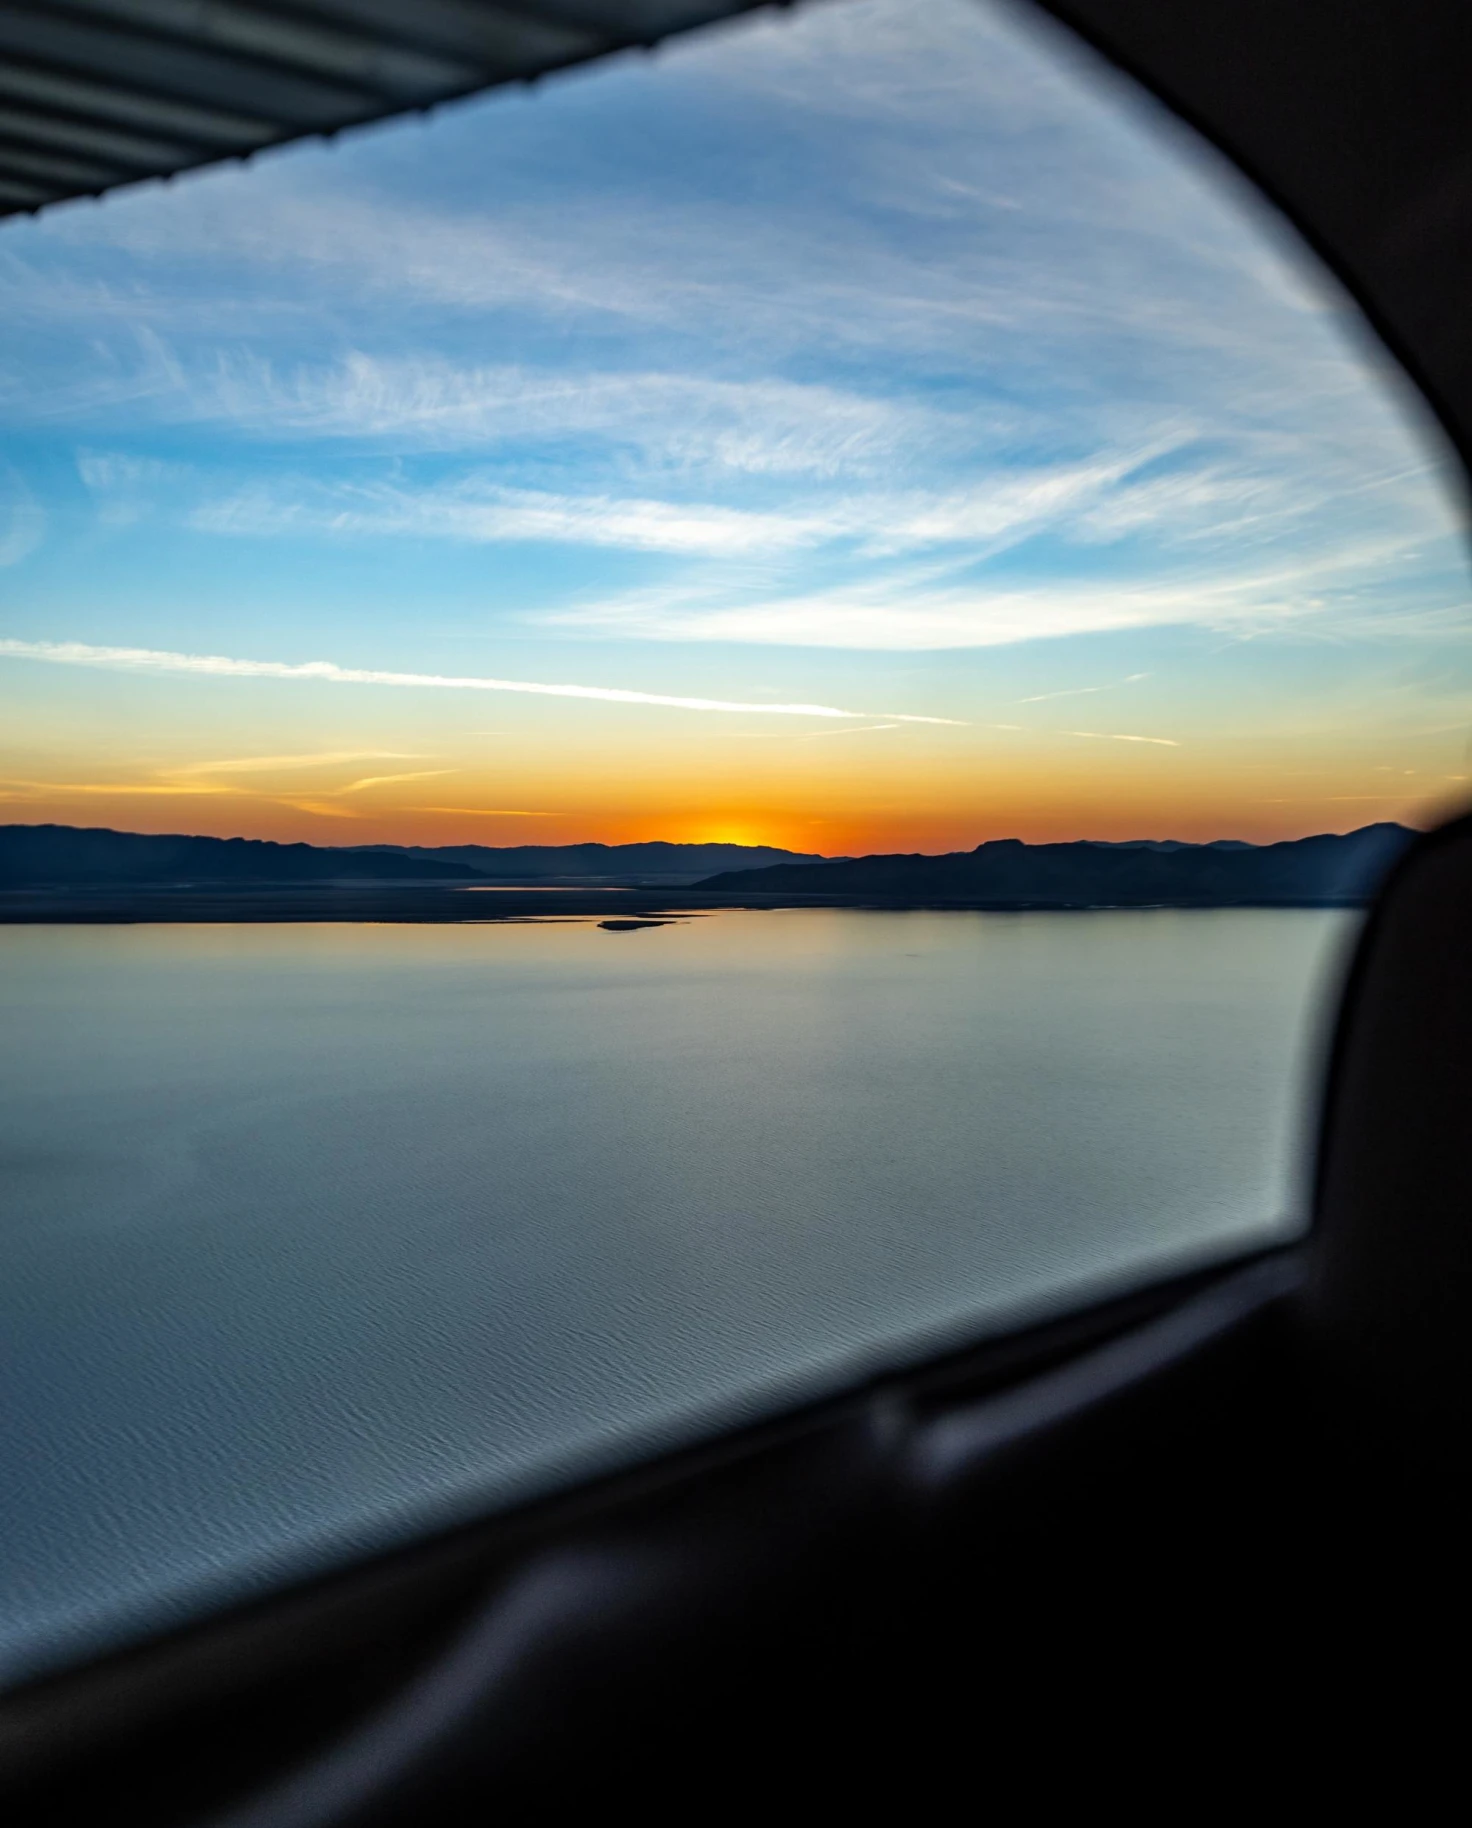 sunset over a pristine lake from the view of a car window